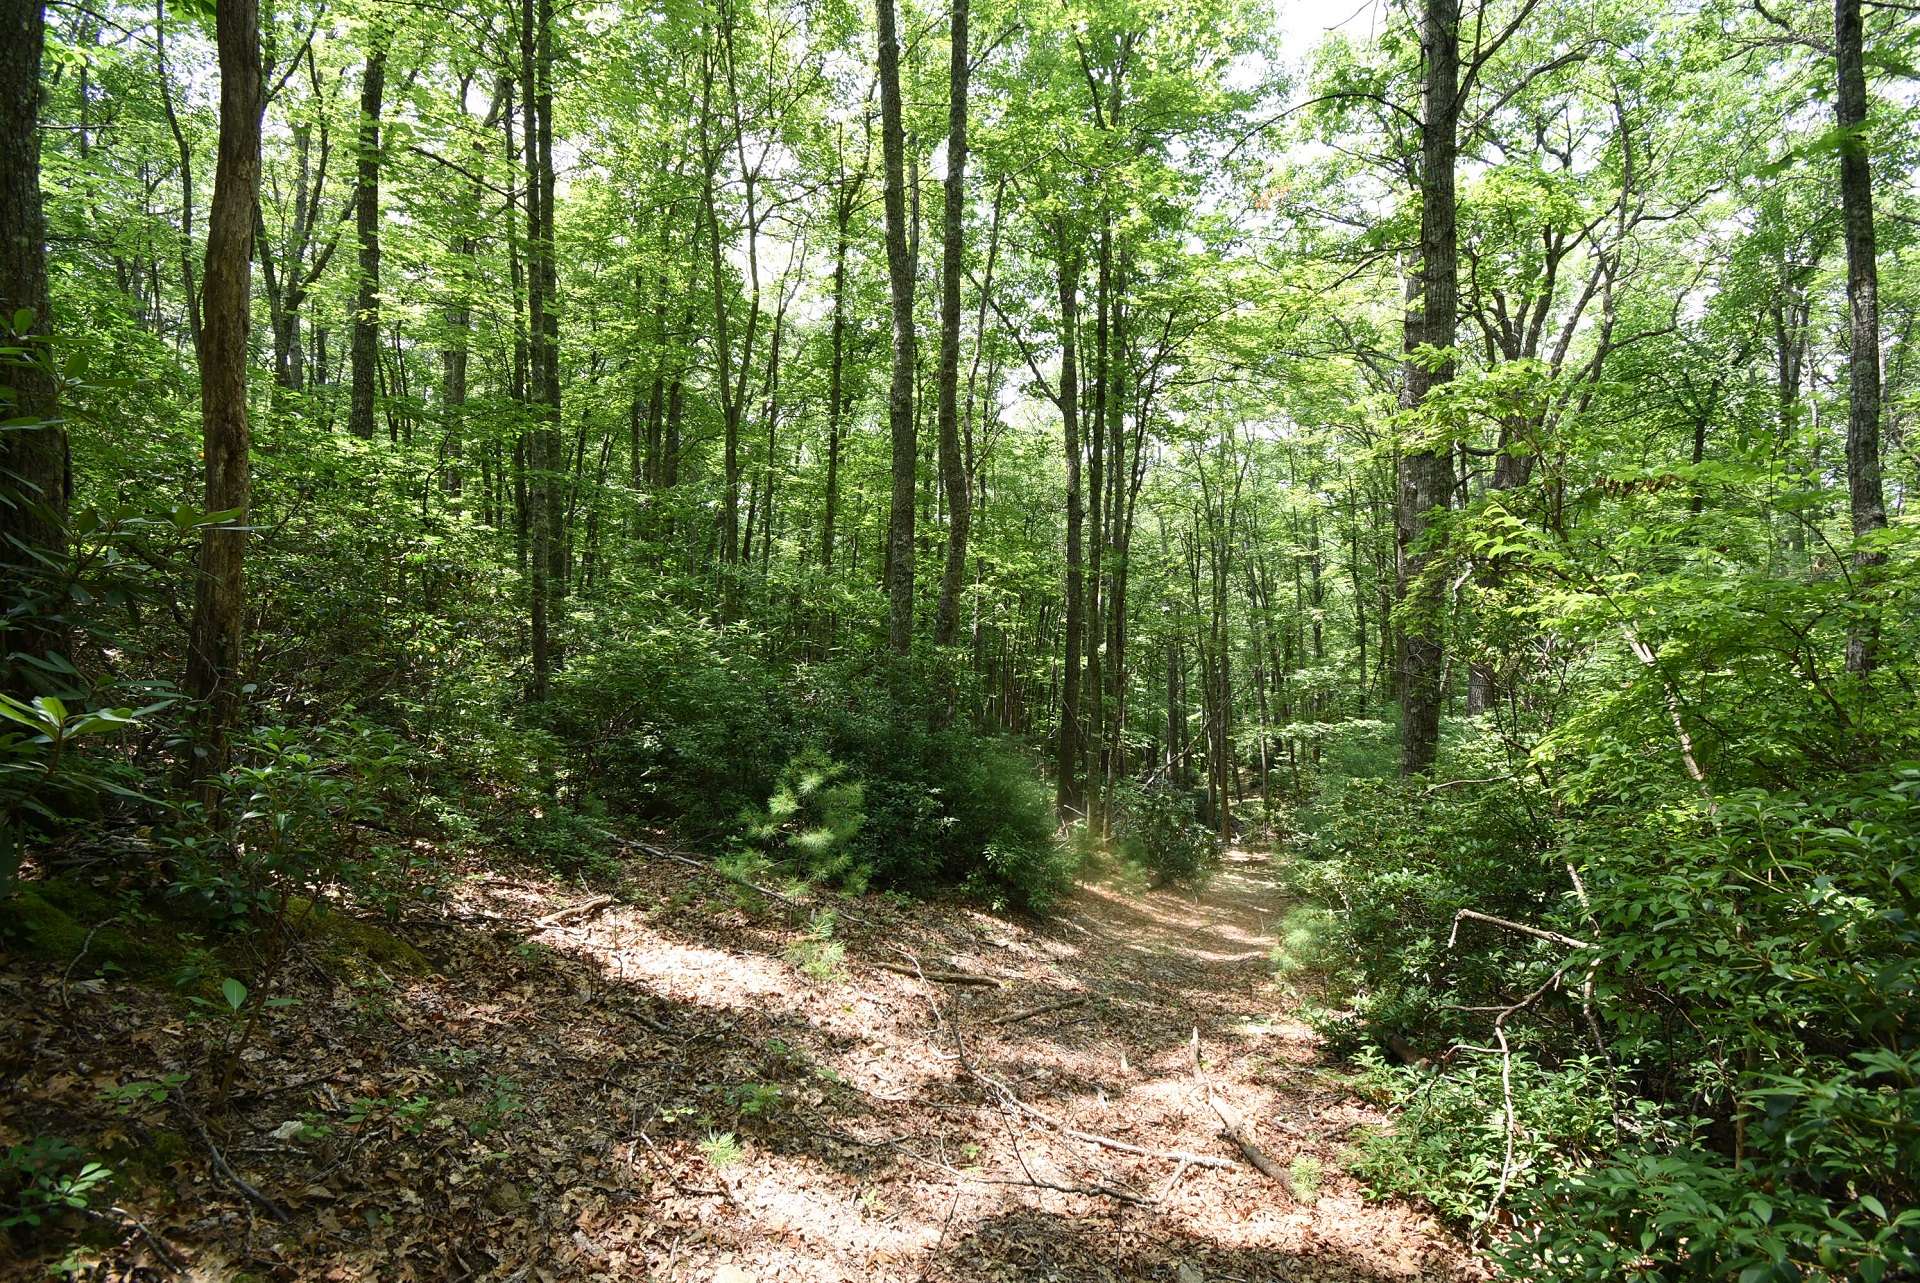 This trail leads to the lowest point, which has a wonderful large glade and a spring-fed creek with pond potential.